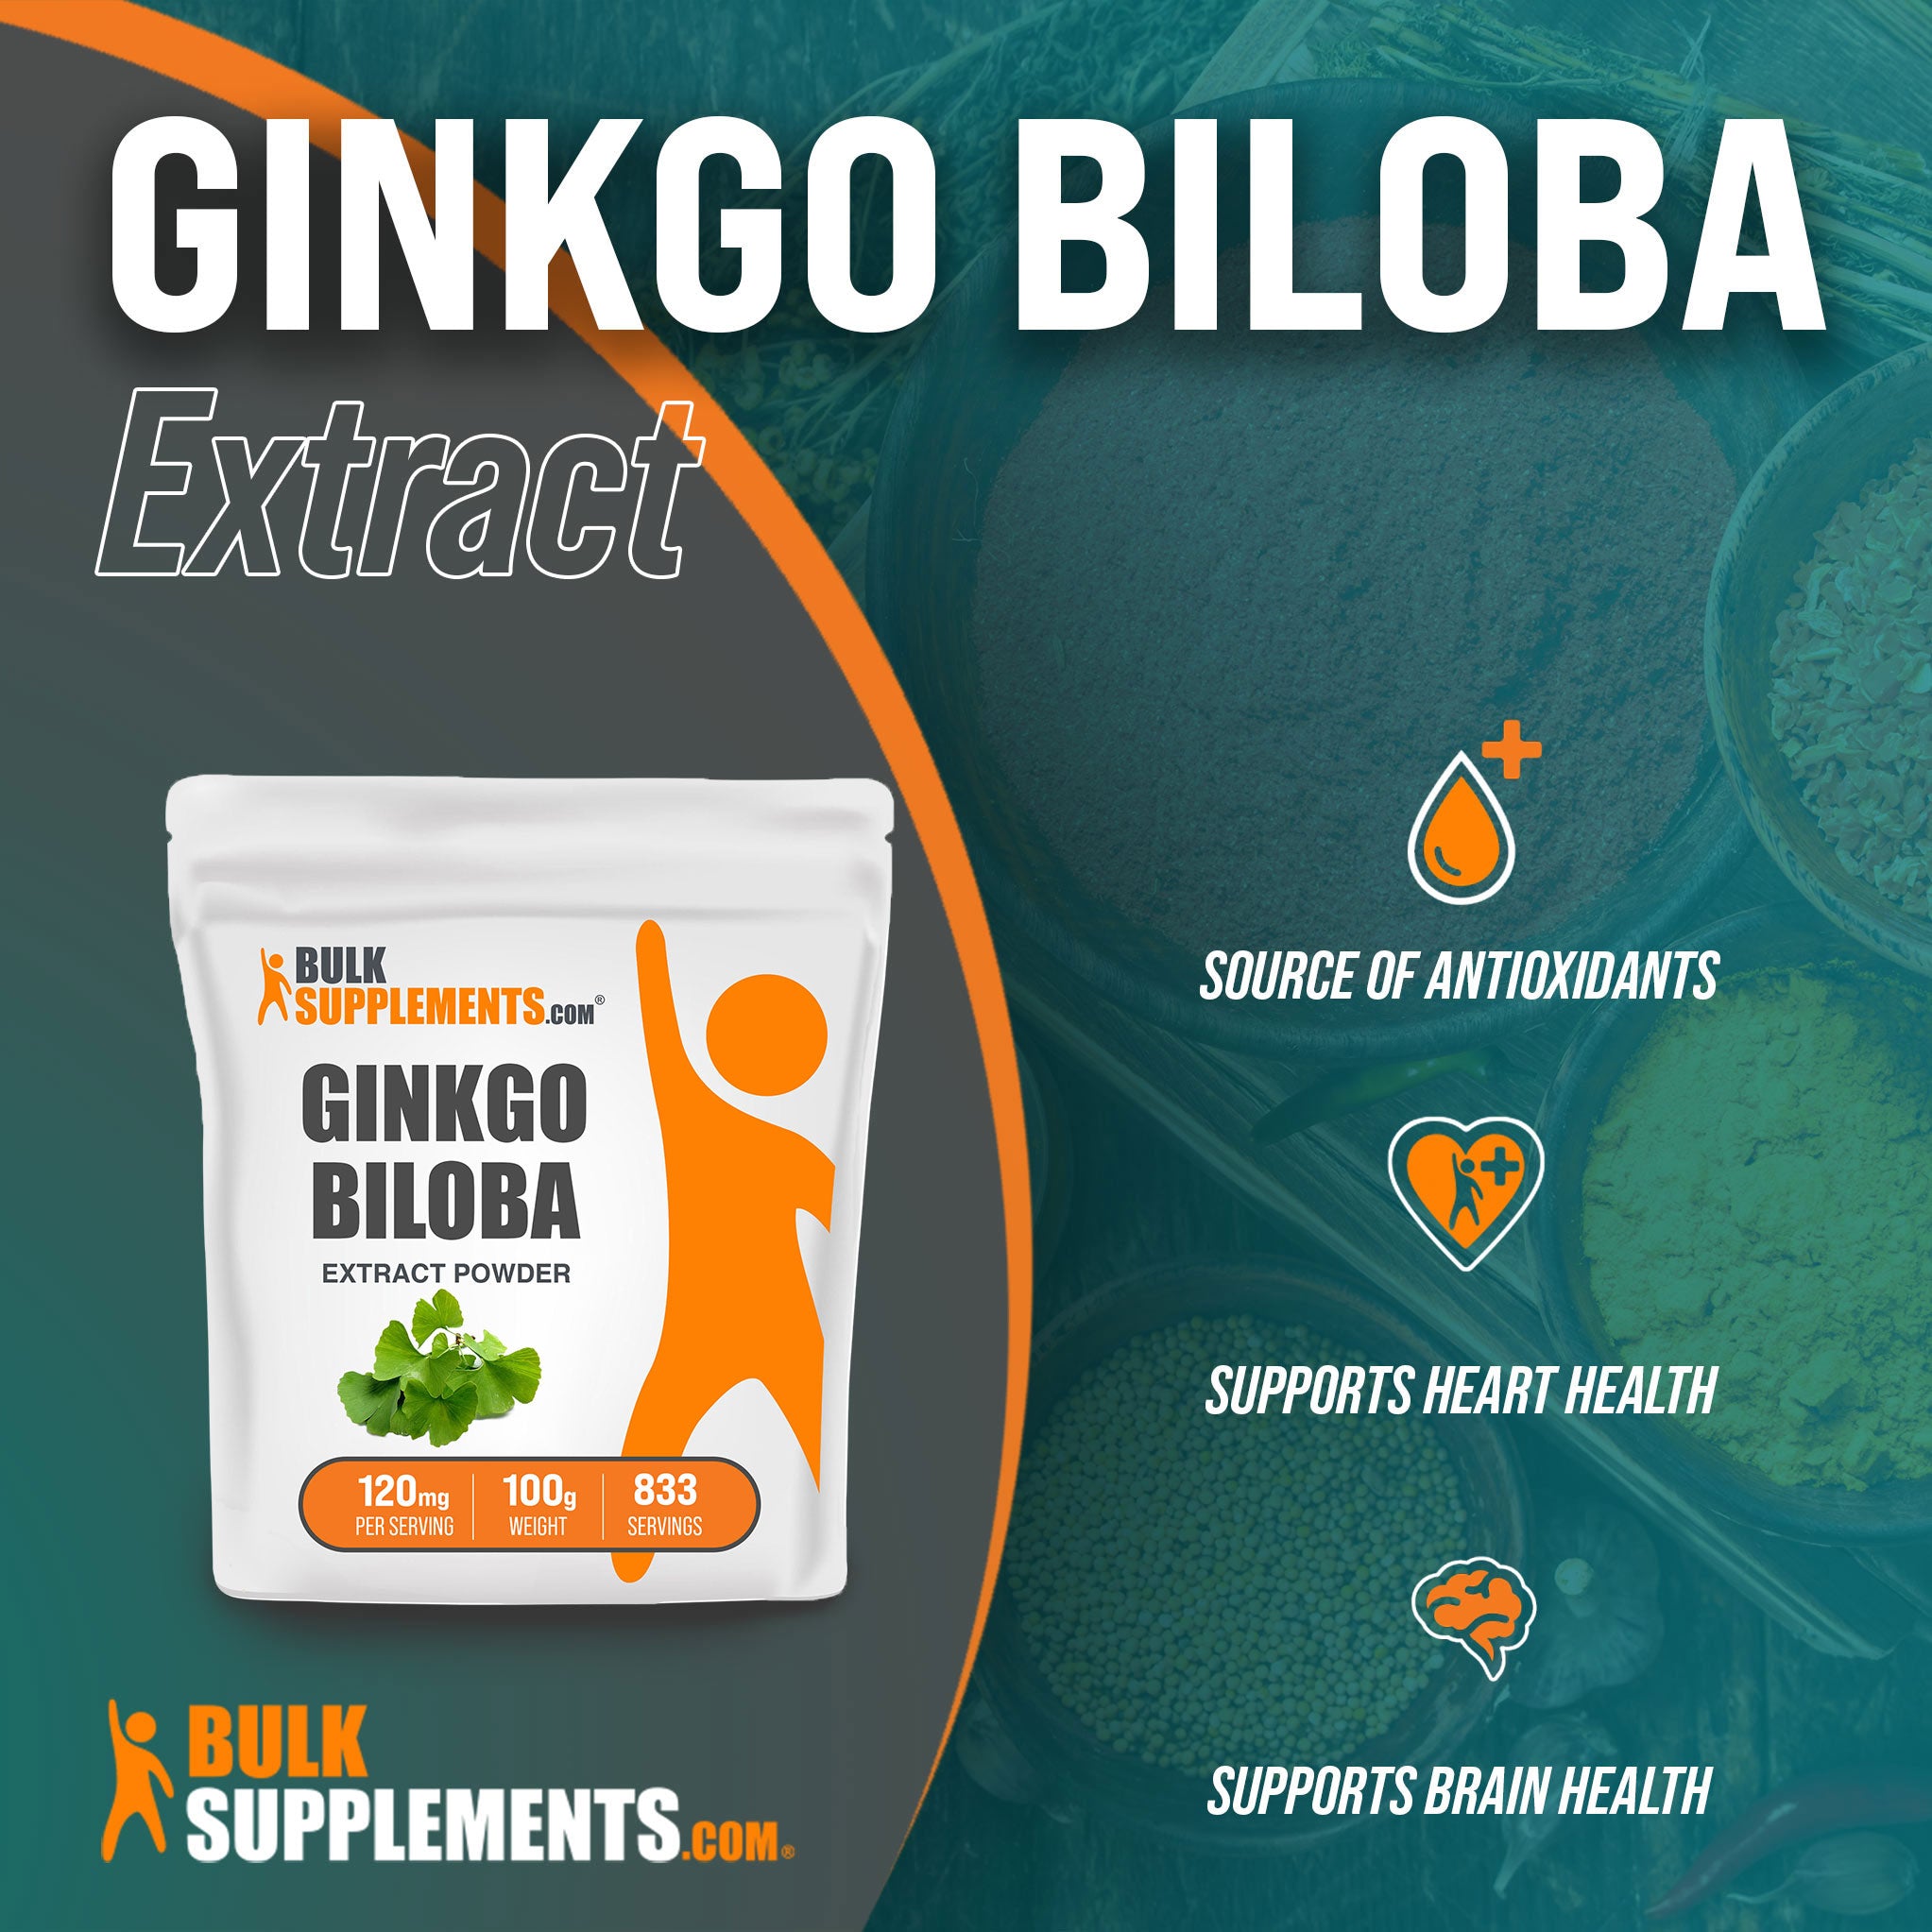 Benefits of Ginkgo Biloba Extract; source of antioxidants, supports heart health, supports brain health